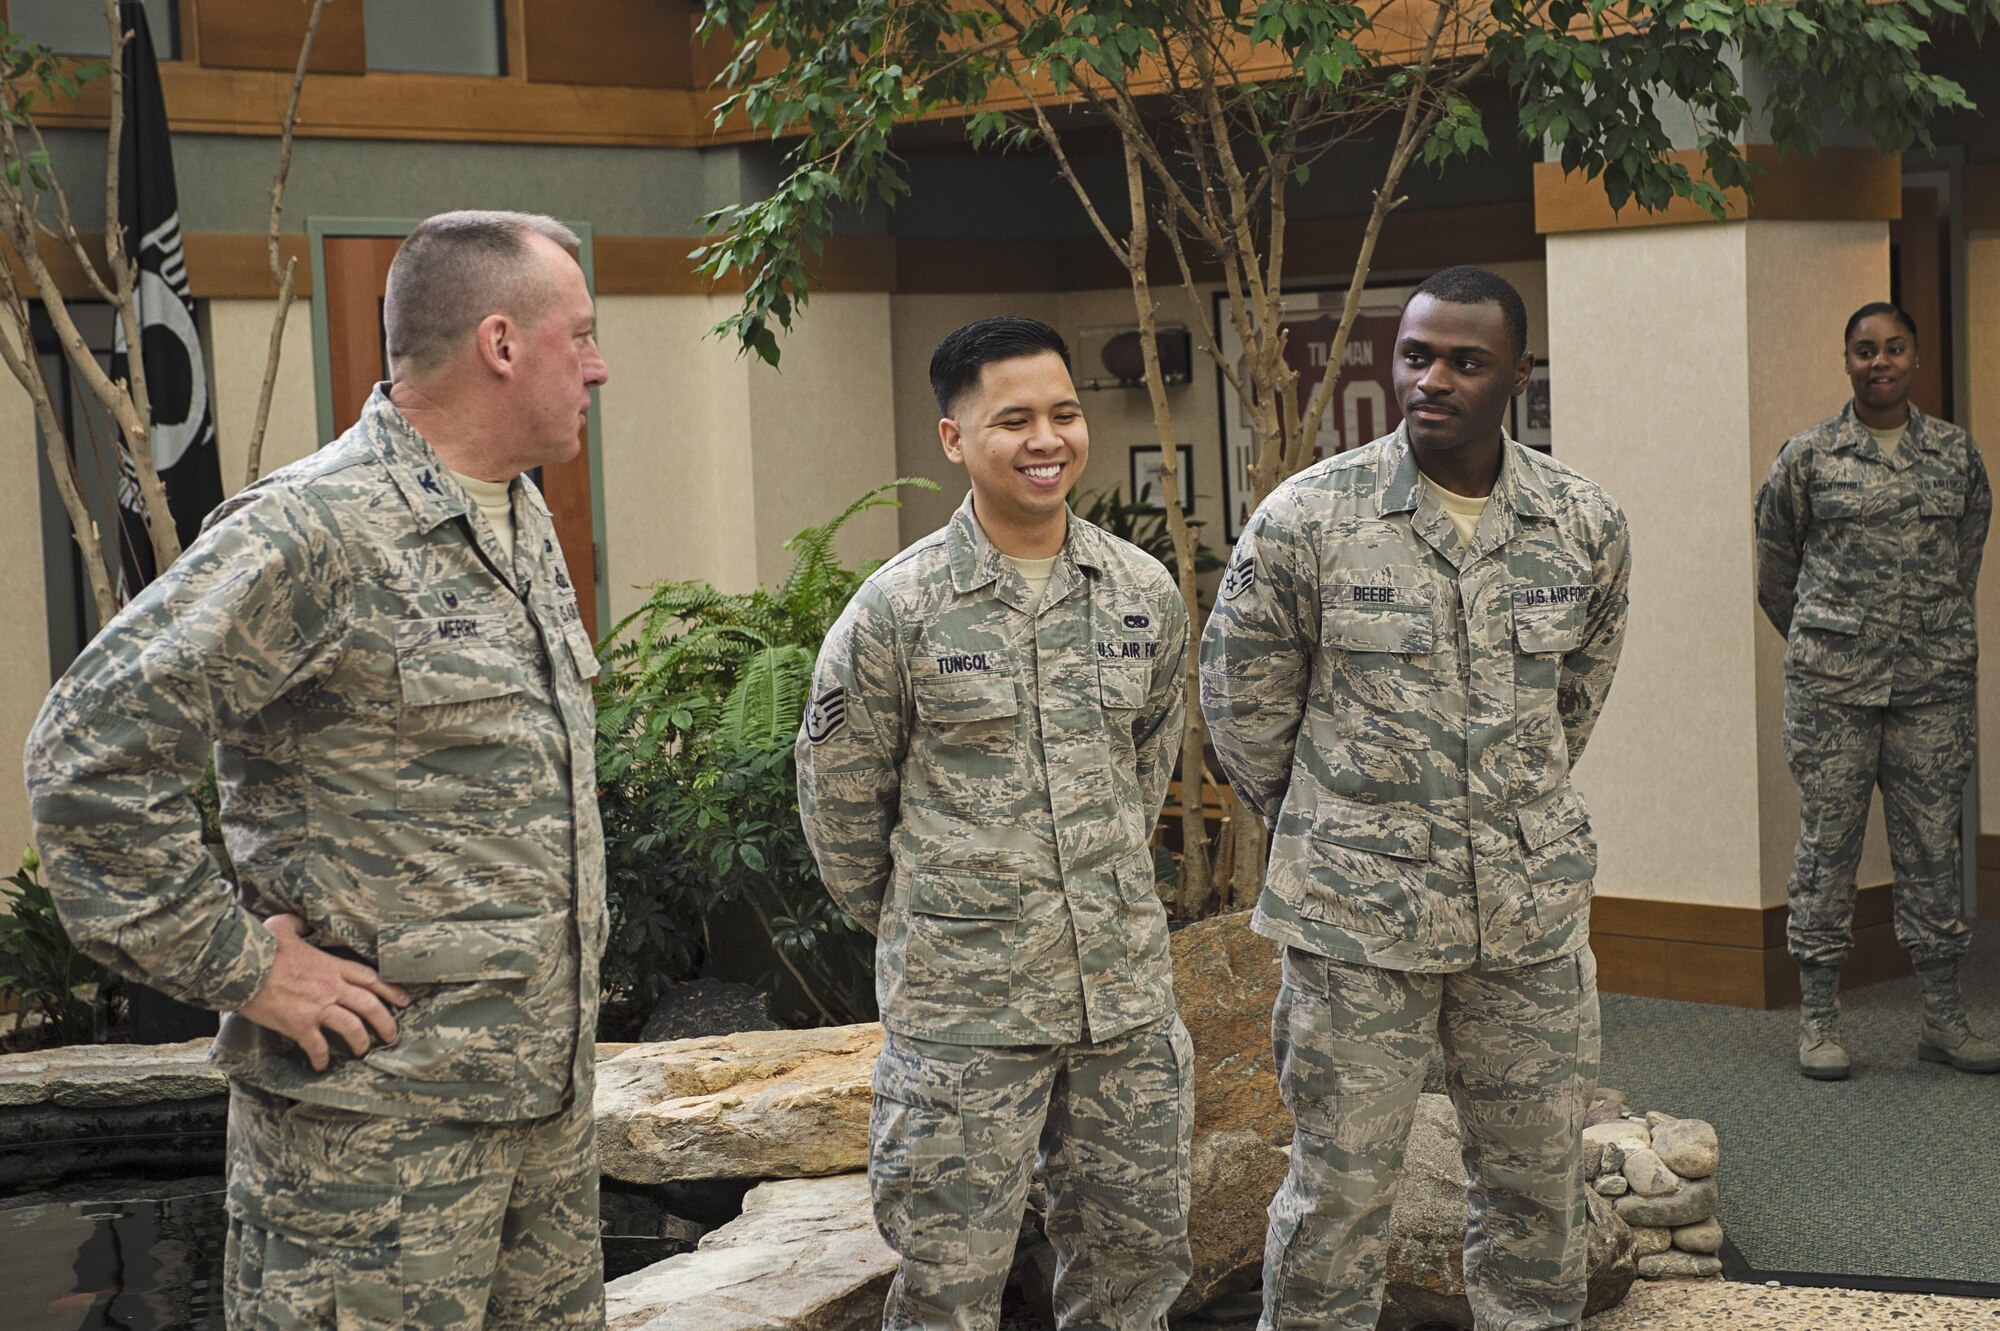 Staff Sgt. Lawrence Tungol, 512th Maintenance Squadron, and Senior Airman Travis Beebe, 512th Memorial Affairs Squadron, are awarded the Air Force Mortuary Affairs Operation Safety Coin from Col. Daniel Merry, AFMAO commander, June 15, 2015, Dover Air Force Base, Del. The two Airmen rushed to a woman stuck inside her vehicle after it overturned when striking another vehicle and assisted her until law enforcement and emergency medical technicians could arrive. (U.S. Air Force Photo/ Tech. Sgt. Nathan Rivard)